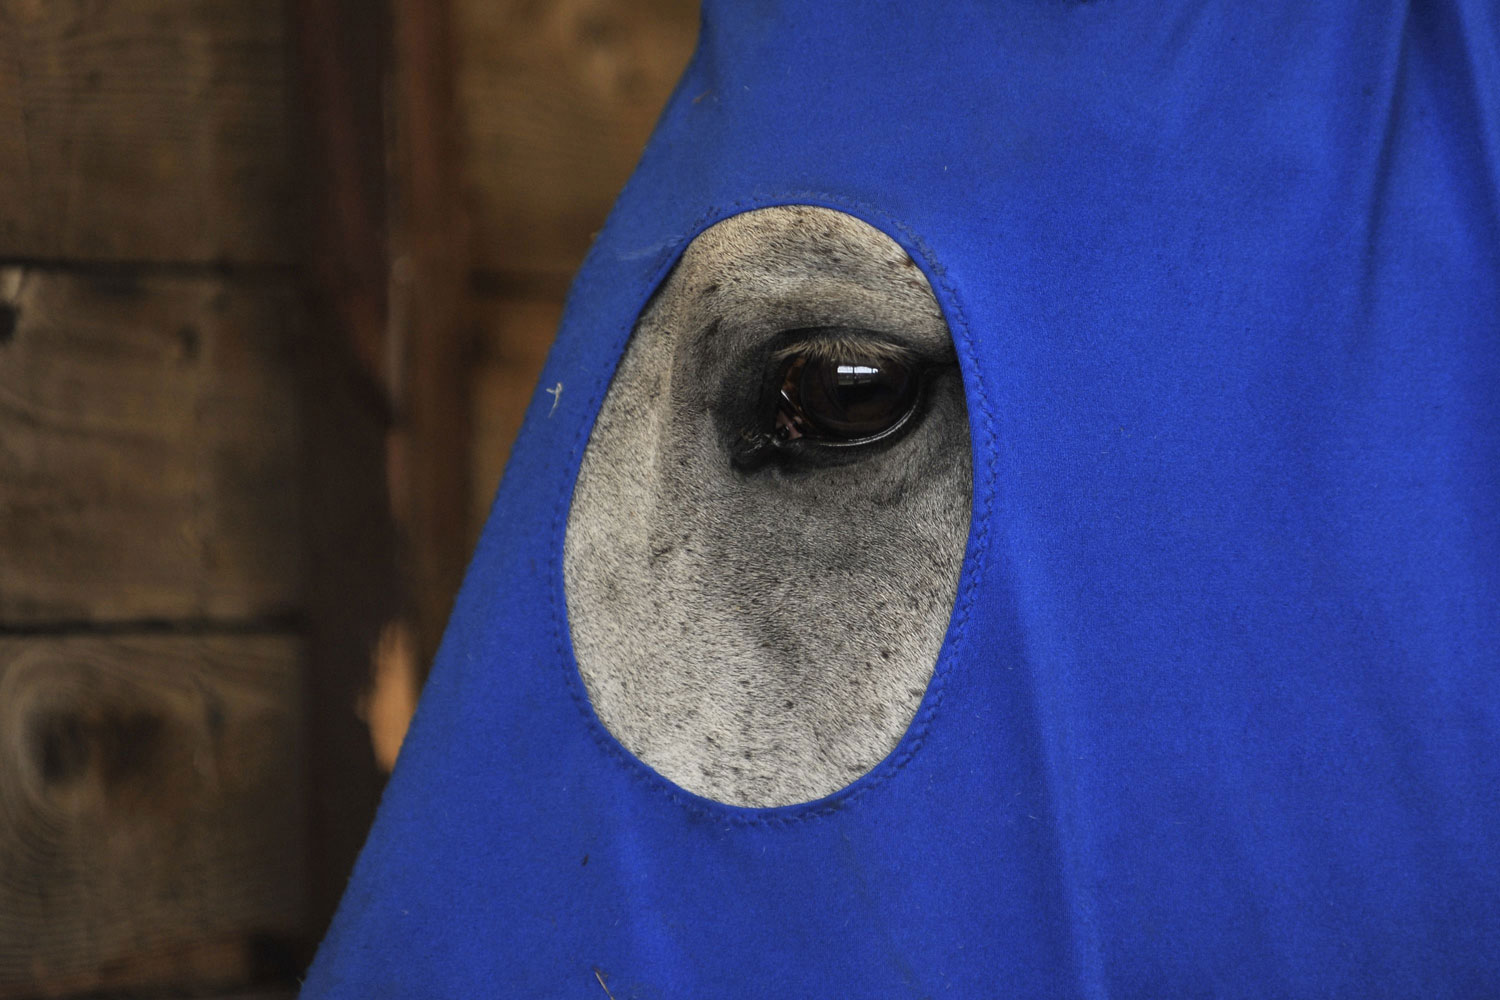 May 11, 2011.  One of the beauties at the Windsor Castle horse show in England looks through its royal blue headgear. The animal exhibition began in 1943.